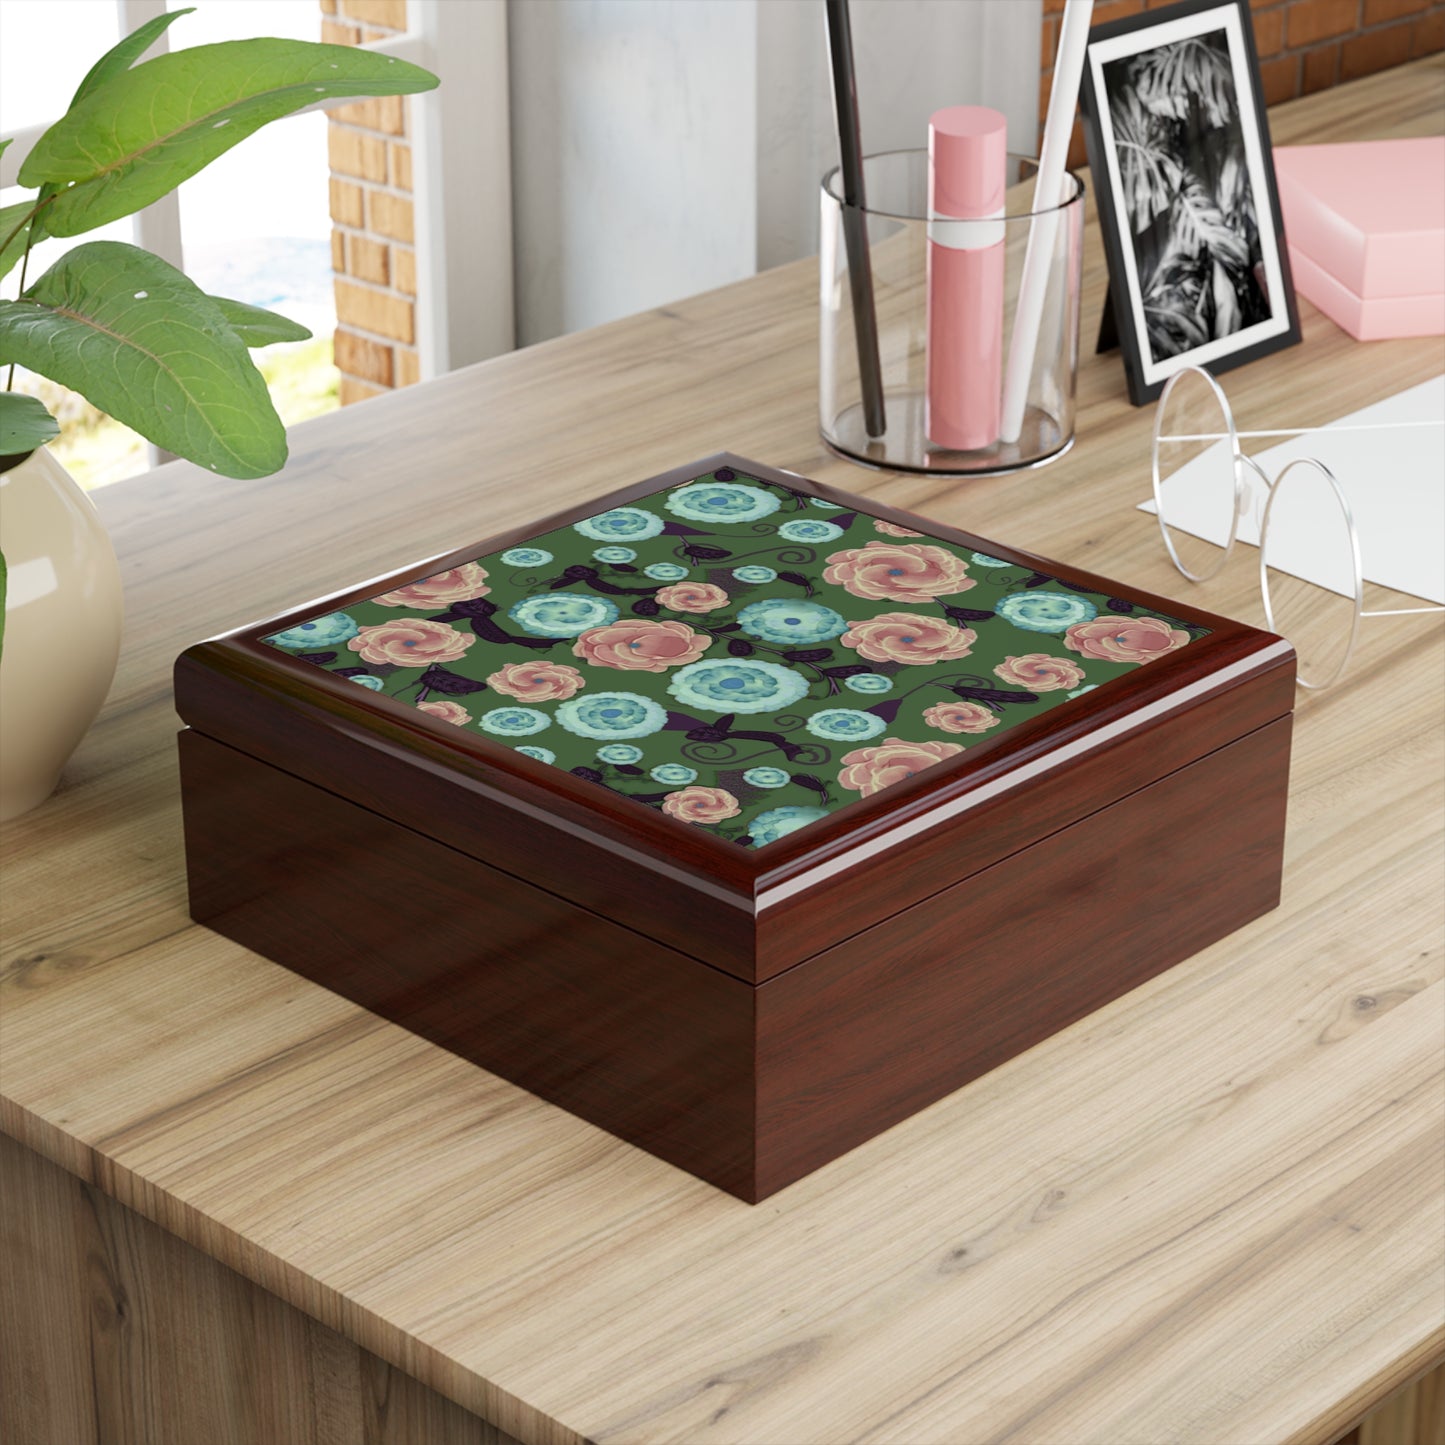 Earthy Peach and Turquoise Flower Pattern Jewelry Box